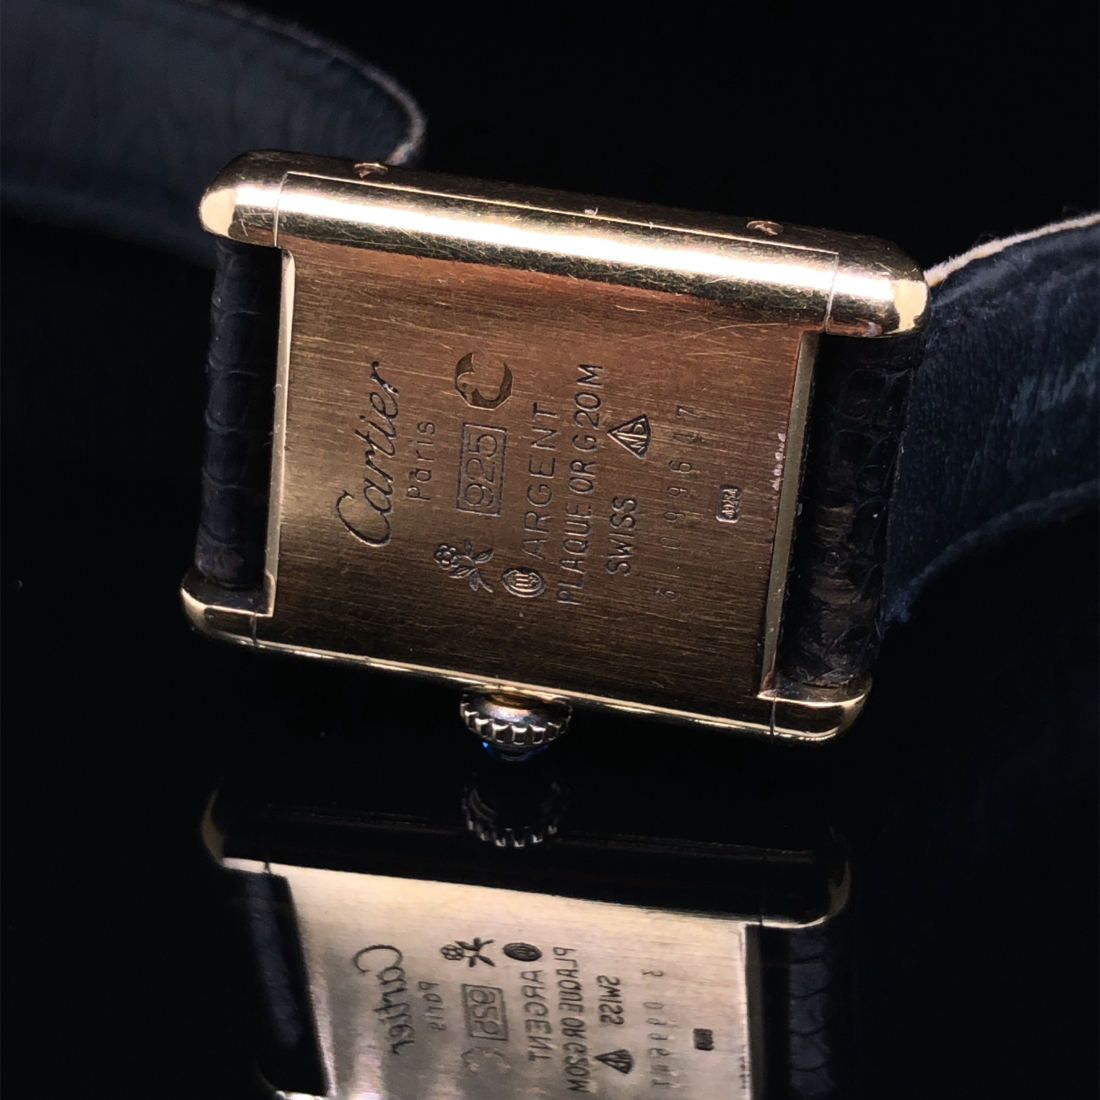 A MUST DE CARTIER SILVER AND GOLD PLATE LADIES WRIST WATCH WITH ORIGINAL LEATHER STRAP AND BUCKLE. - Image 3 of 3